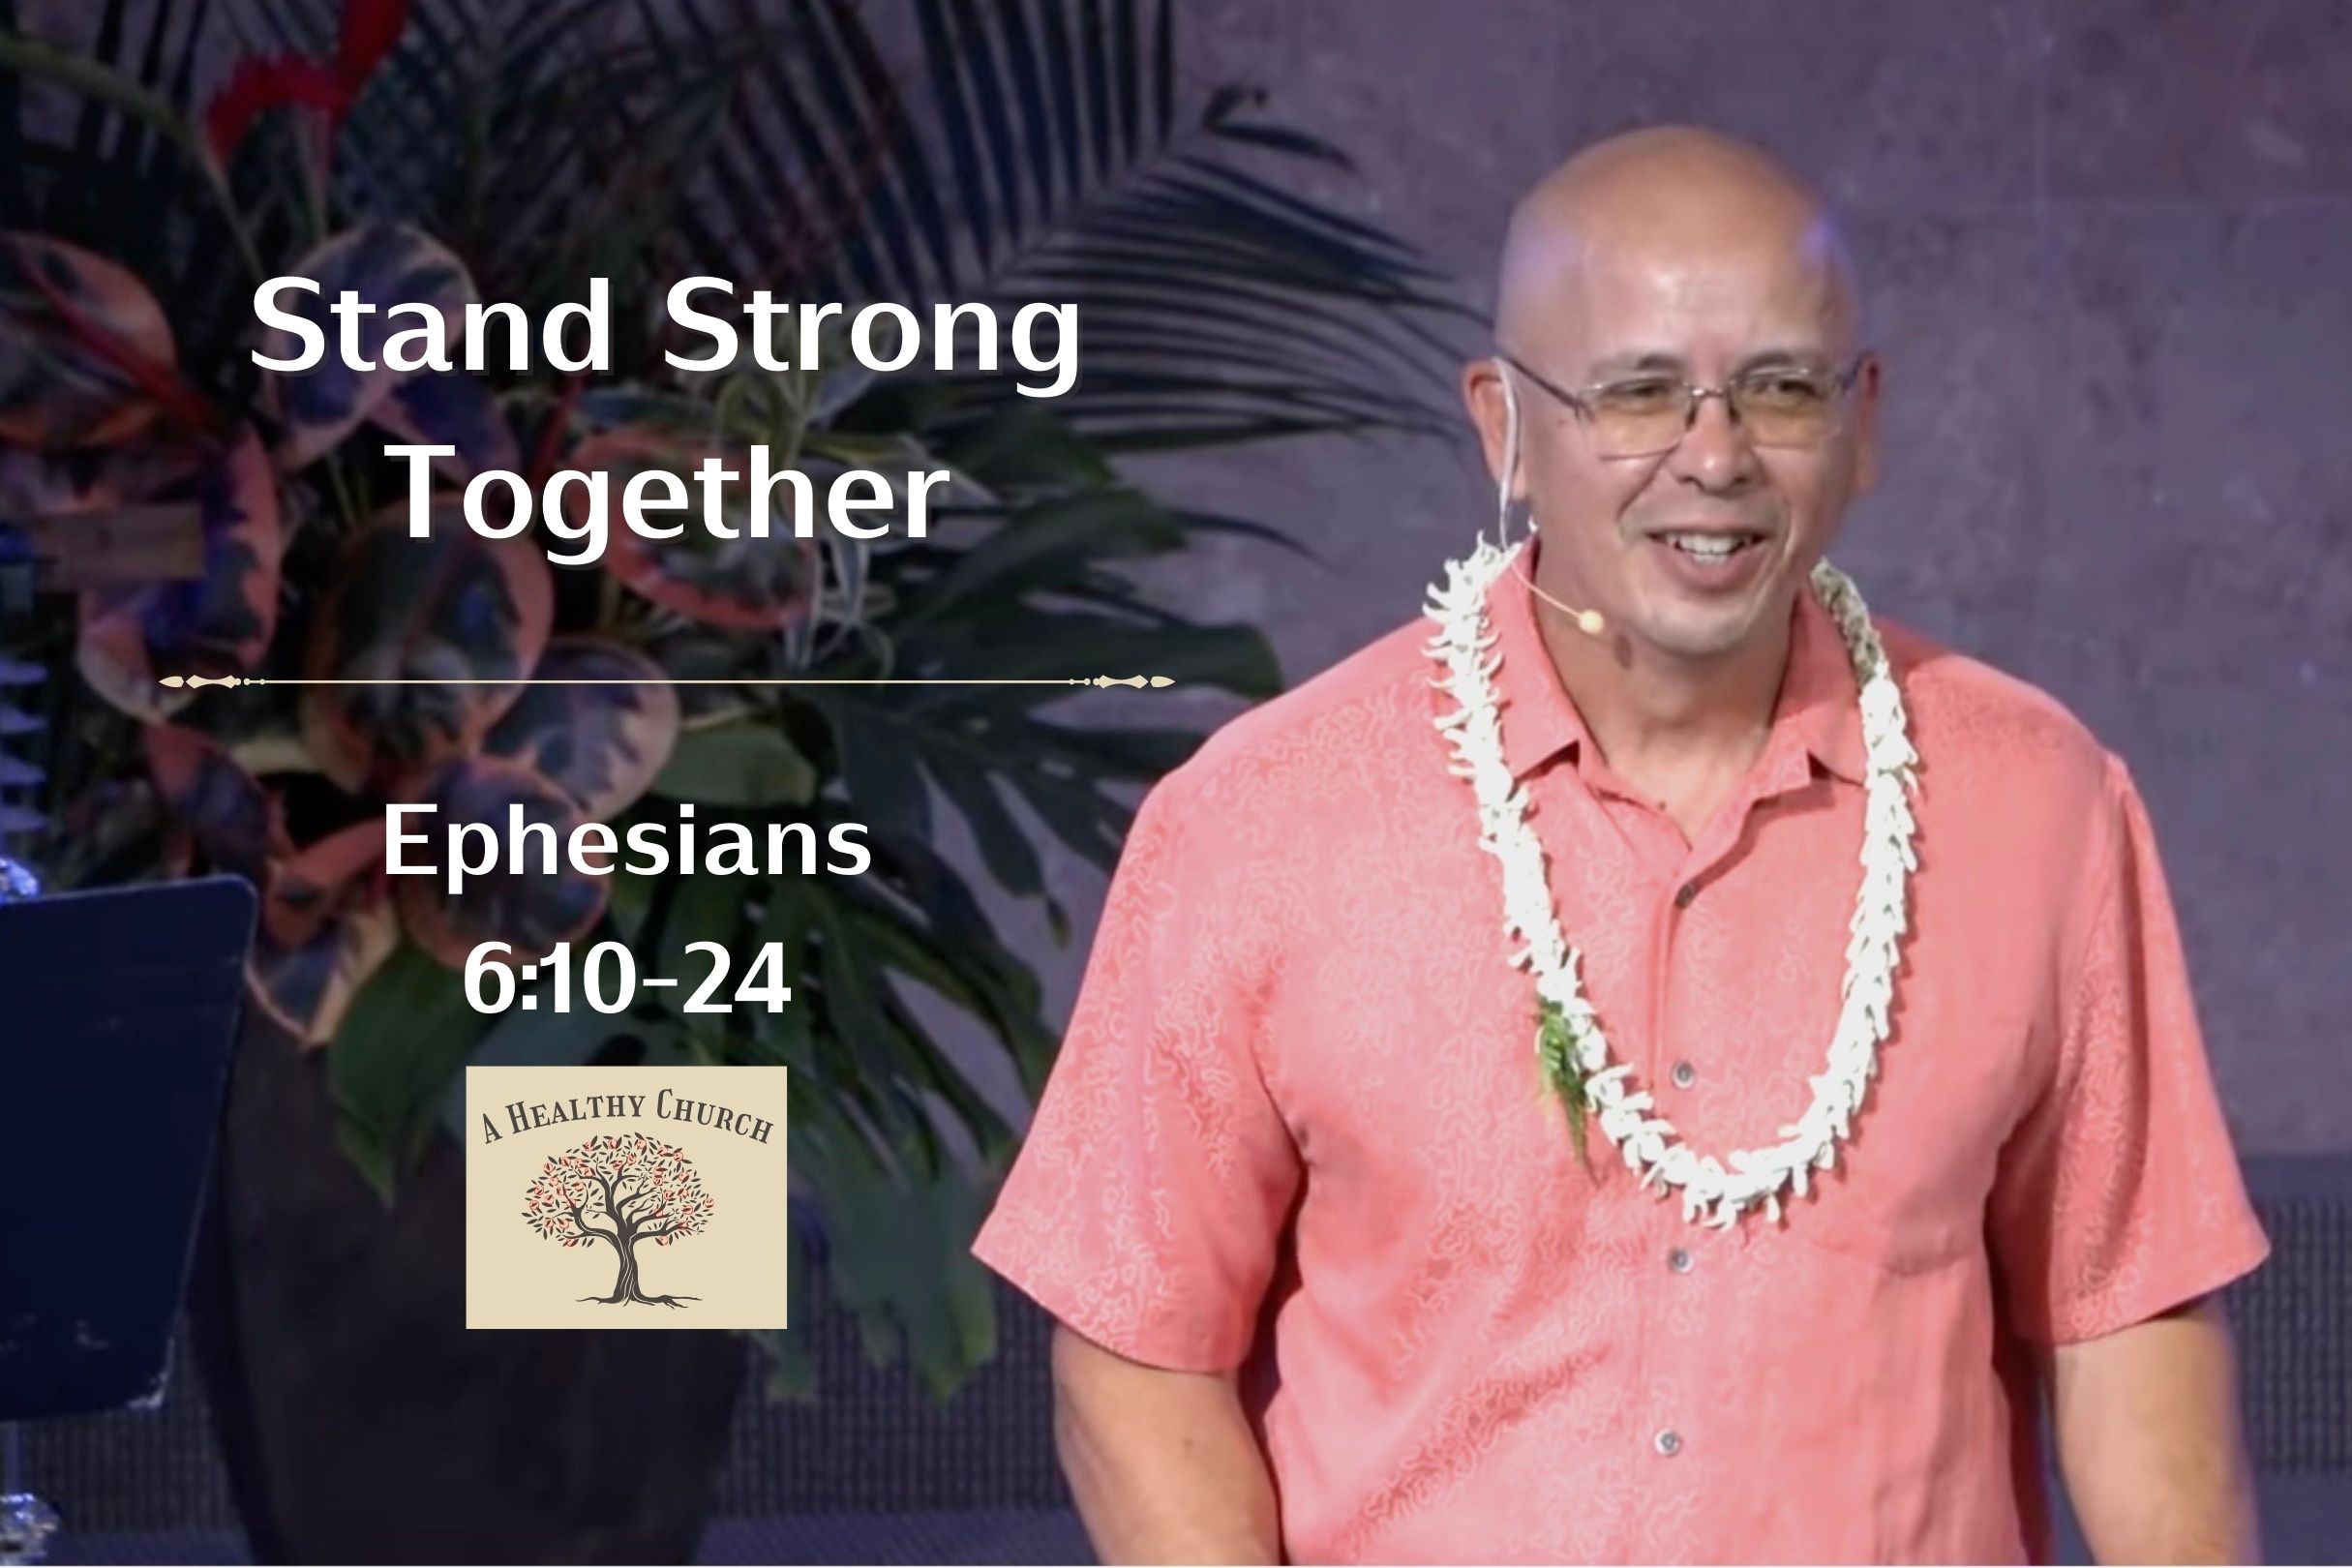 A Healthy Church - Stand Stronger Together (Ephesians 6:10-24)